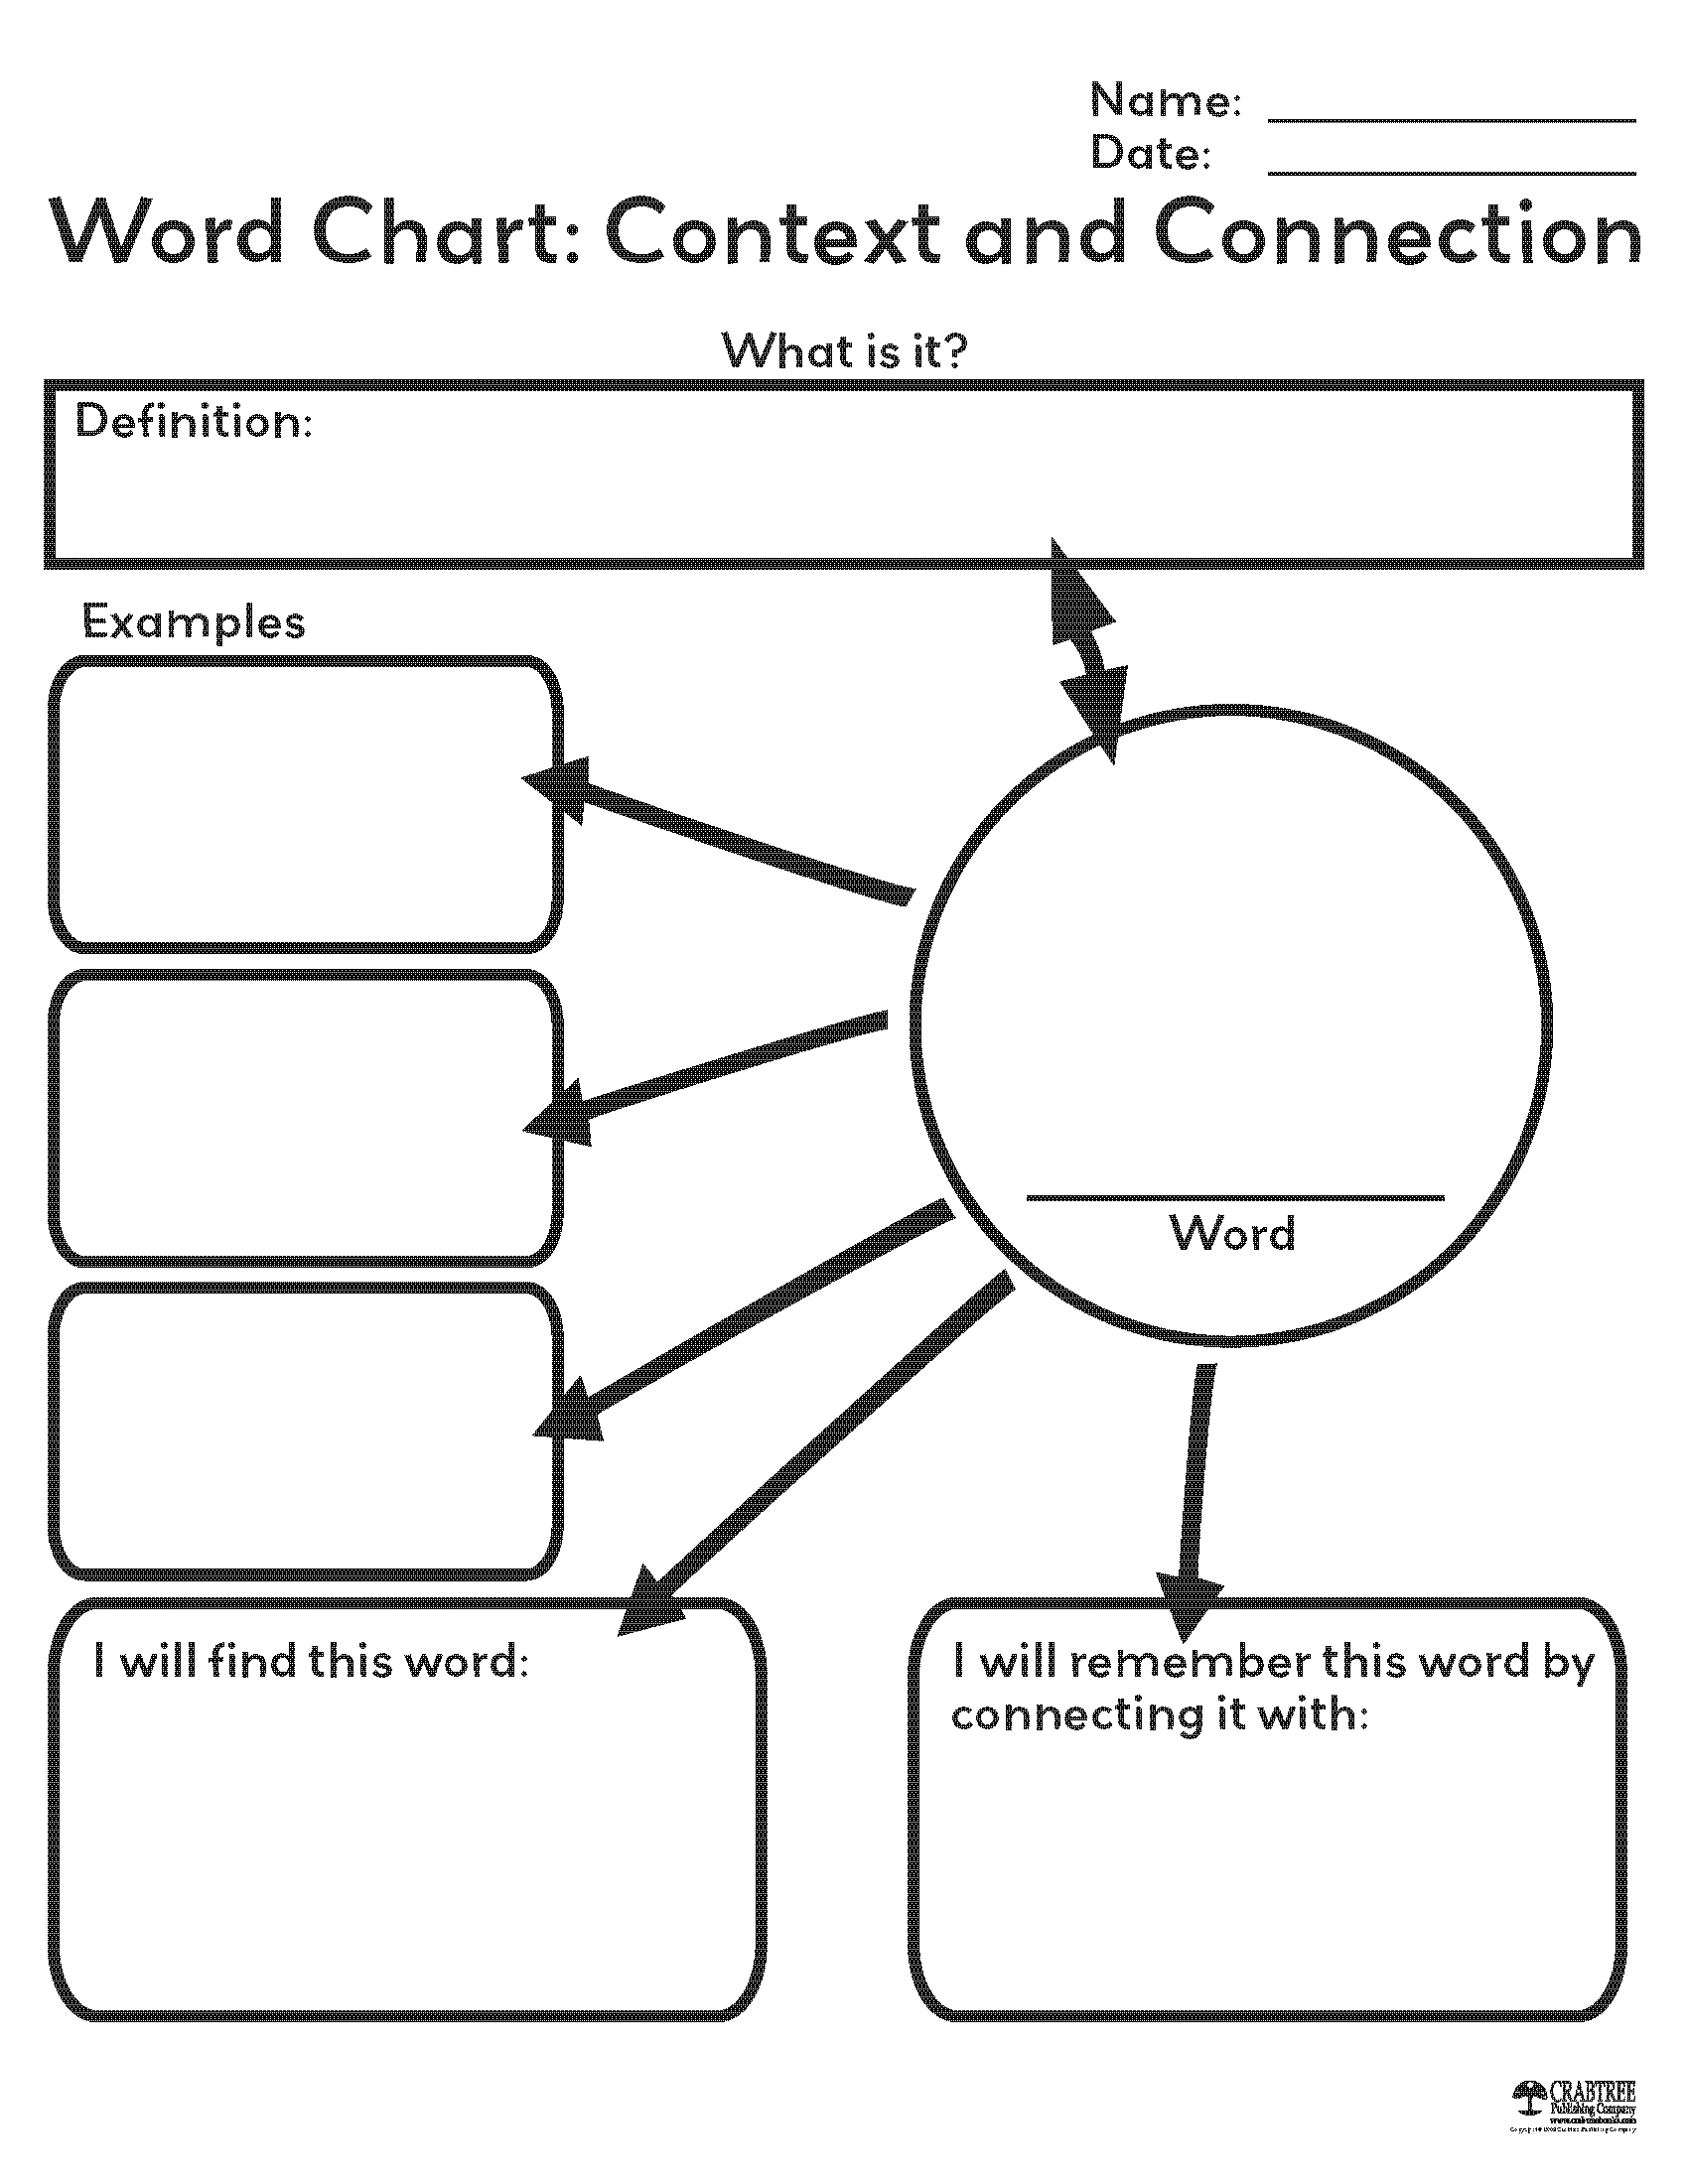 Free Printable Word Chart From Crabtree Publishing | School - Free Printable Graphic Organizers